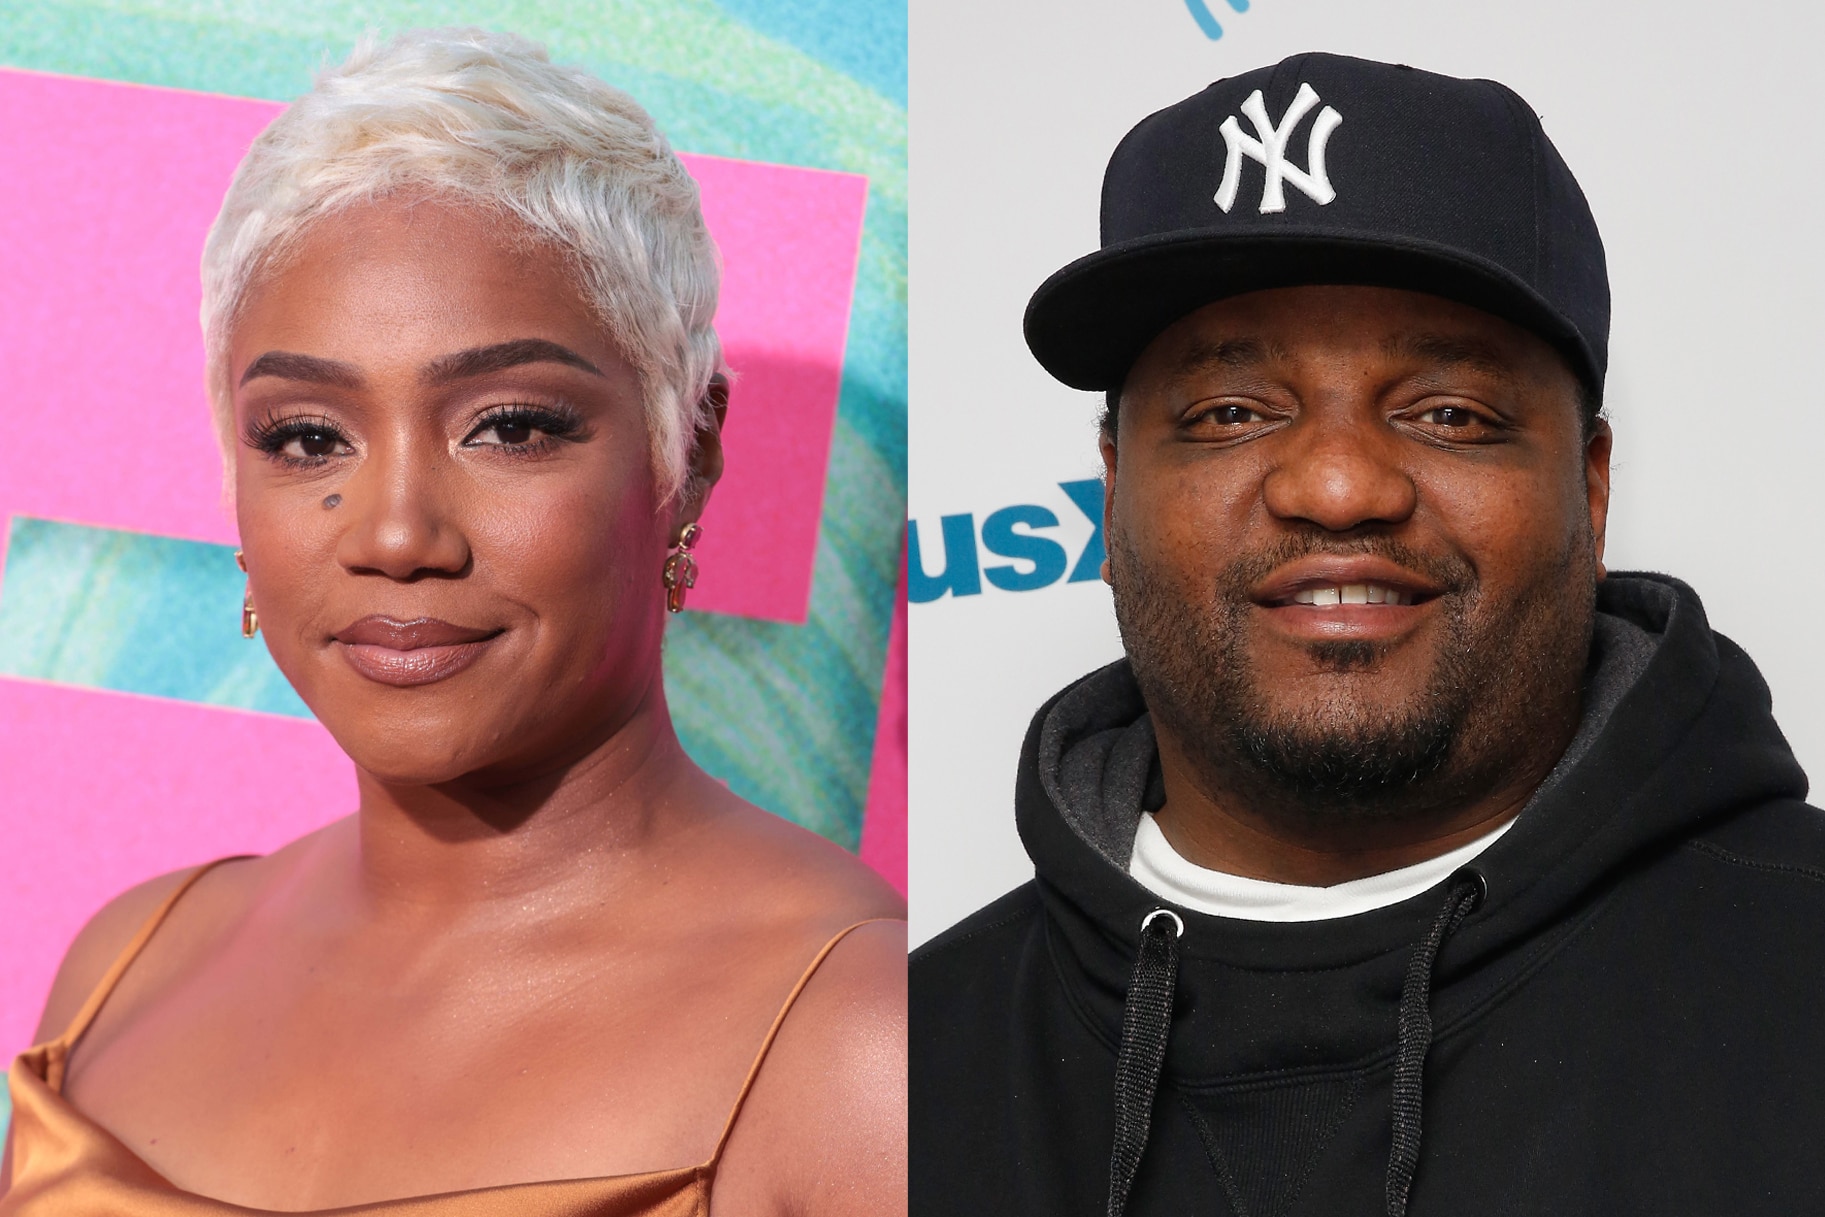 A side by side photo of Tiffany Haddish and Aries Spears